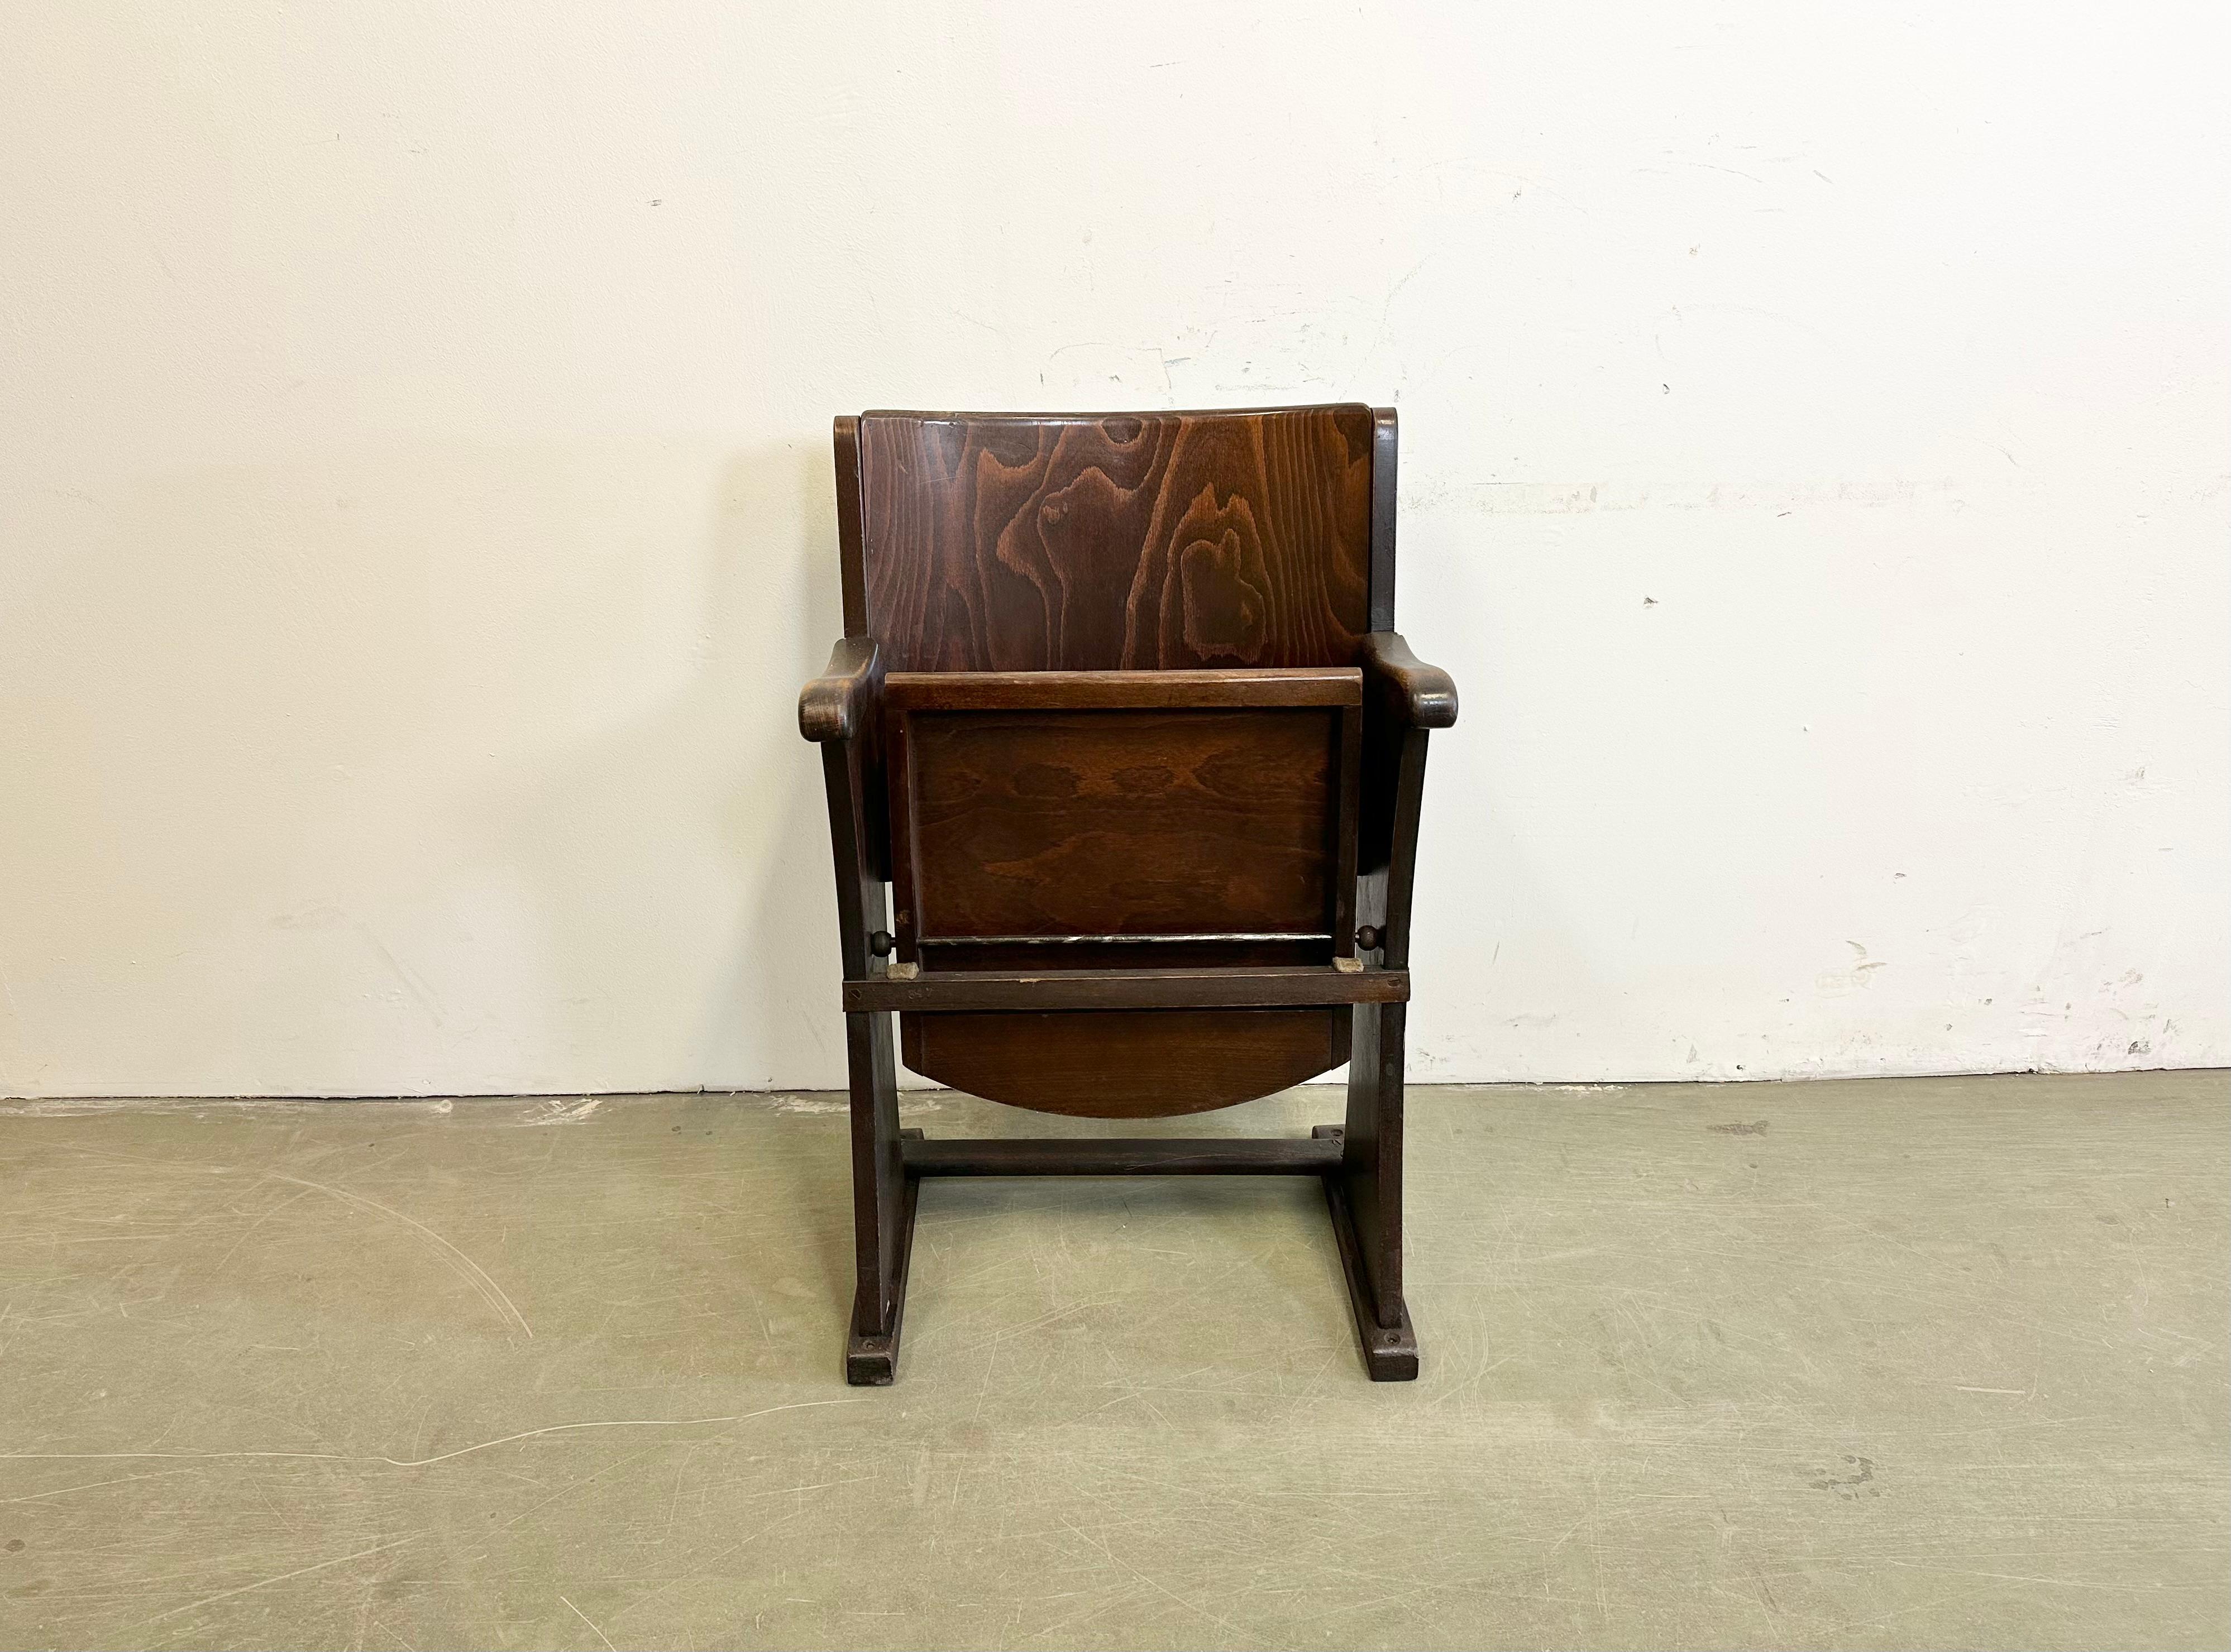 This folding cinema chair was produced by Thonet in former Czechoslovakia during the 1930s-1950s. The chair is stable and can be placed anywhere. It is completely made of wood (partly solid wood, partly plywood). The seat fold upwards. The weight of